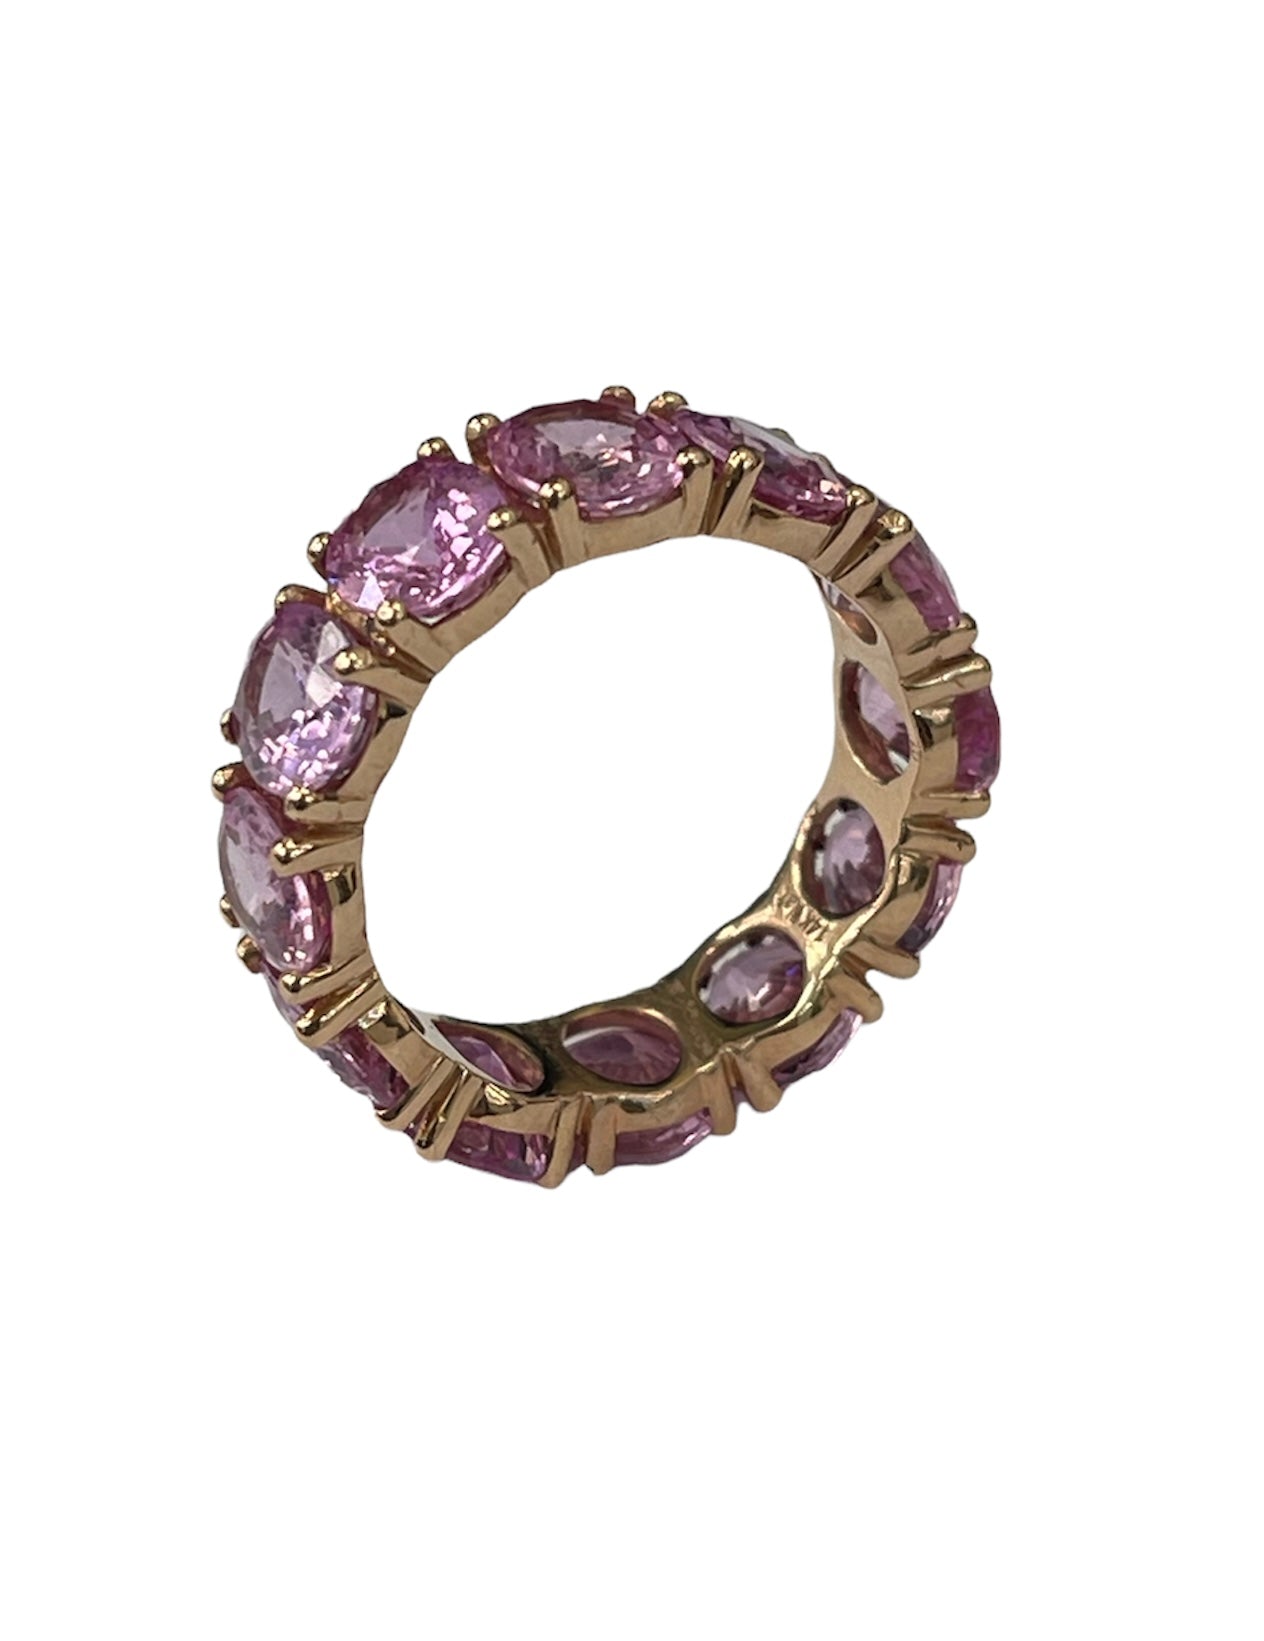 Natural Pink Sapphire Oval Shape Eternity Gem Ring Rose Gold Size 6.5